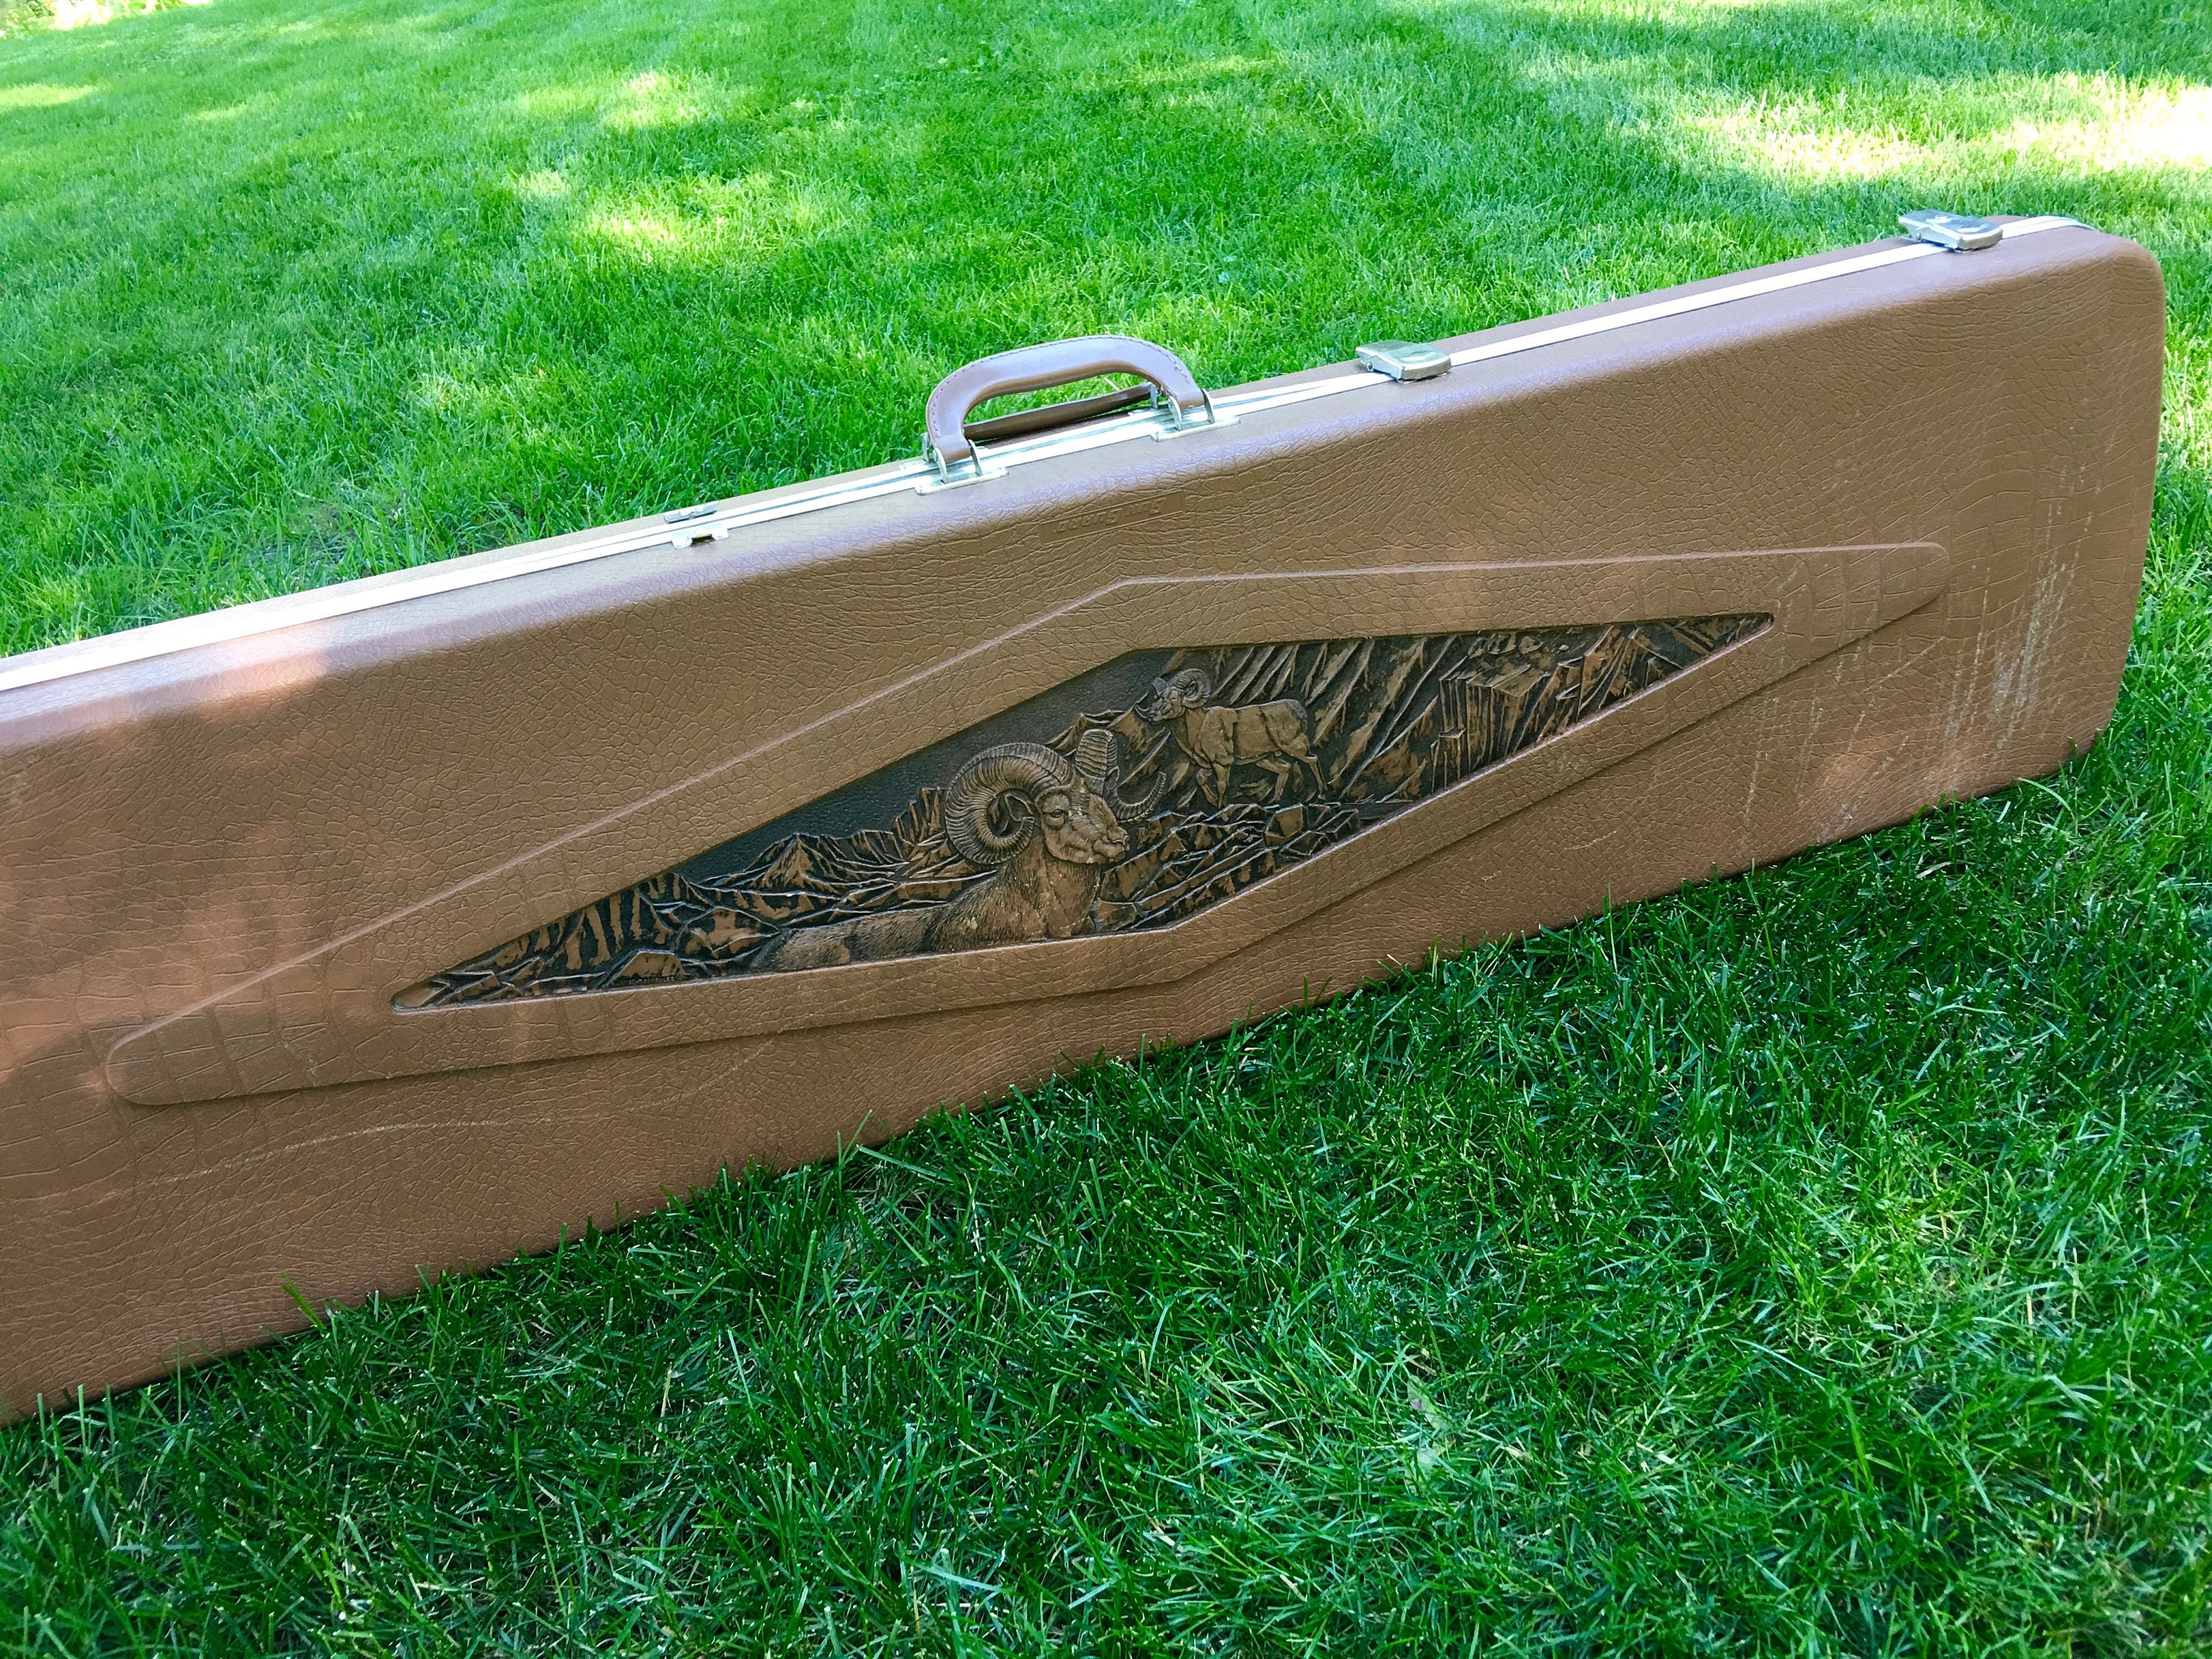 SALE Vintage Doskocil Gun Guard Double Rifle Hard Carrying Case With Ram  Scene 52 X 13 X 4 Inches 